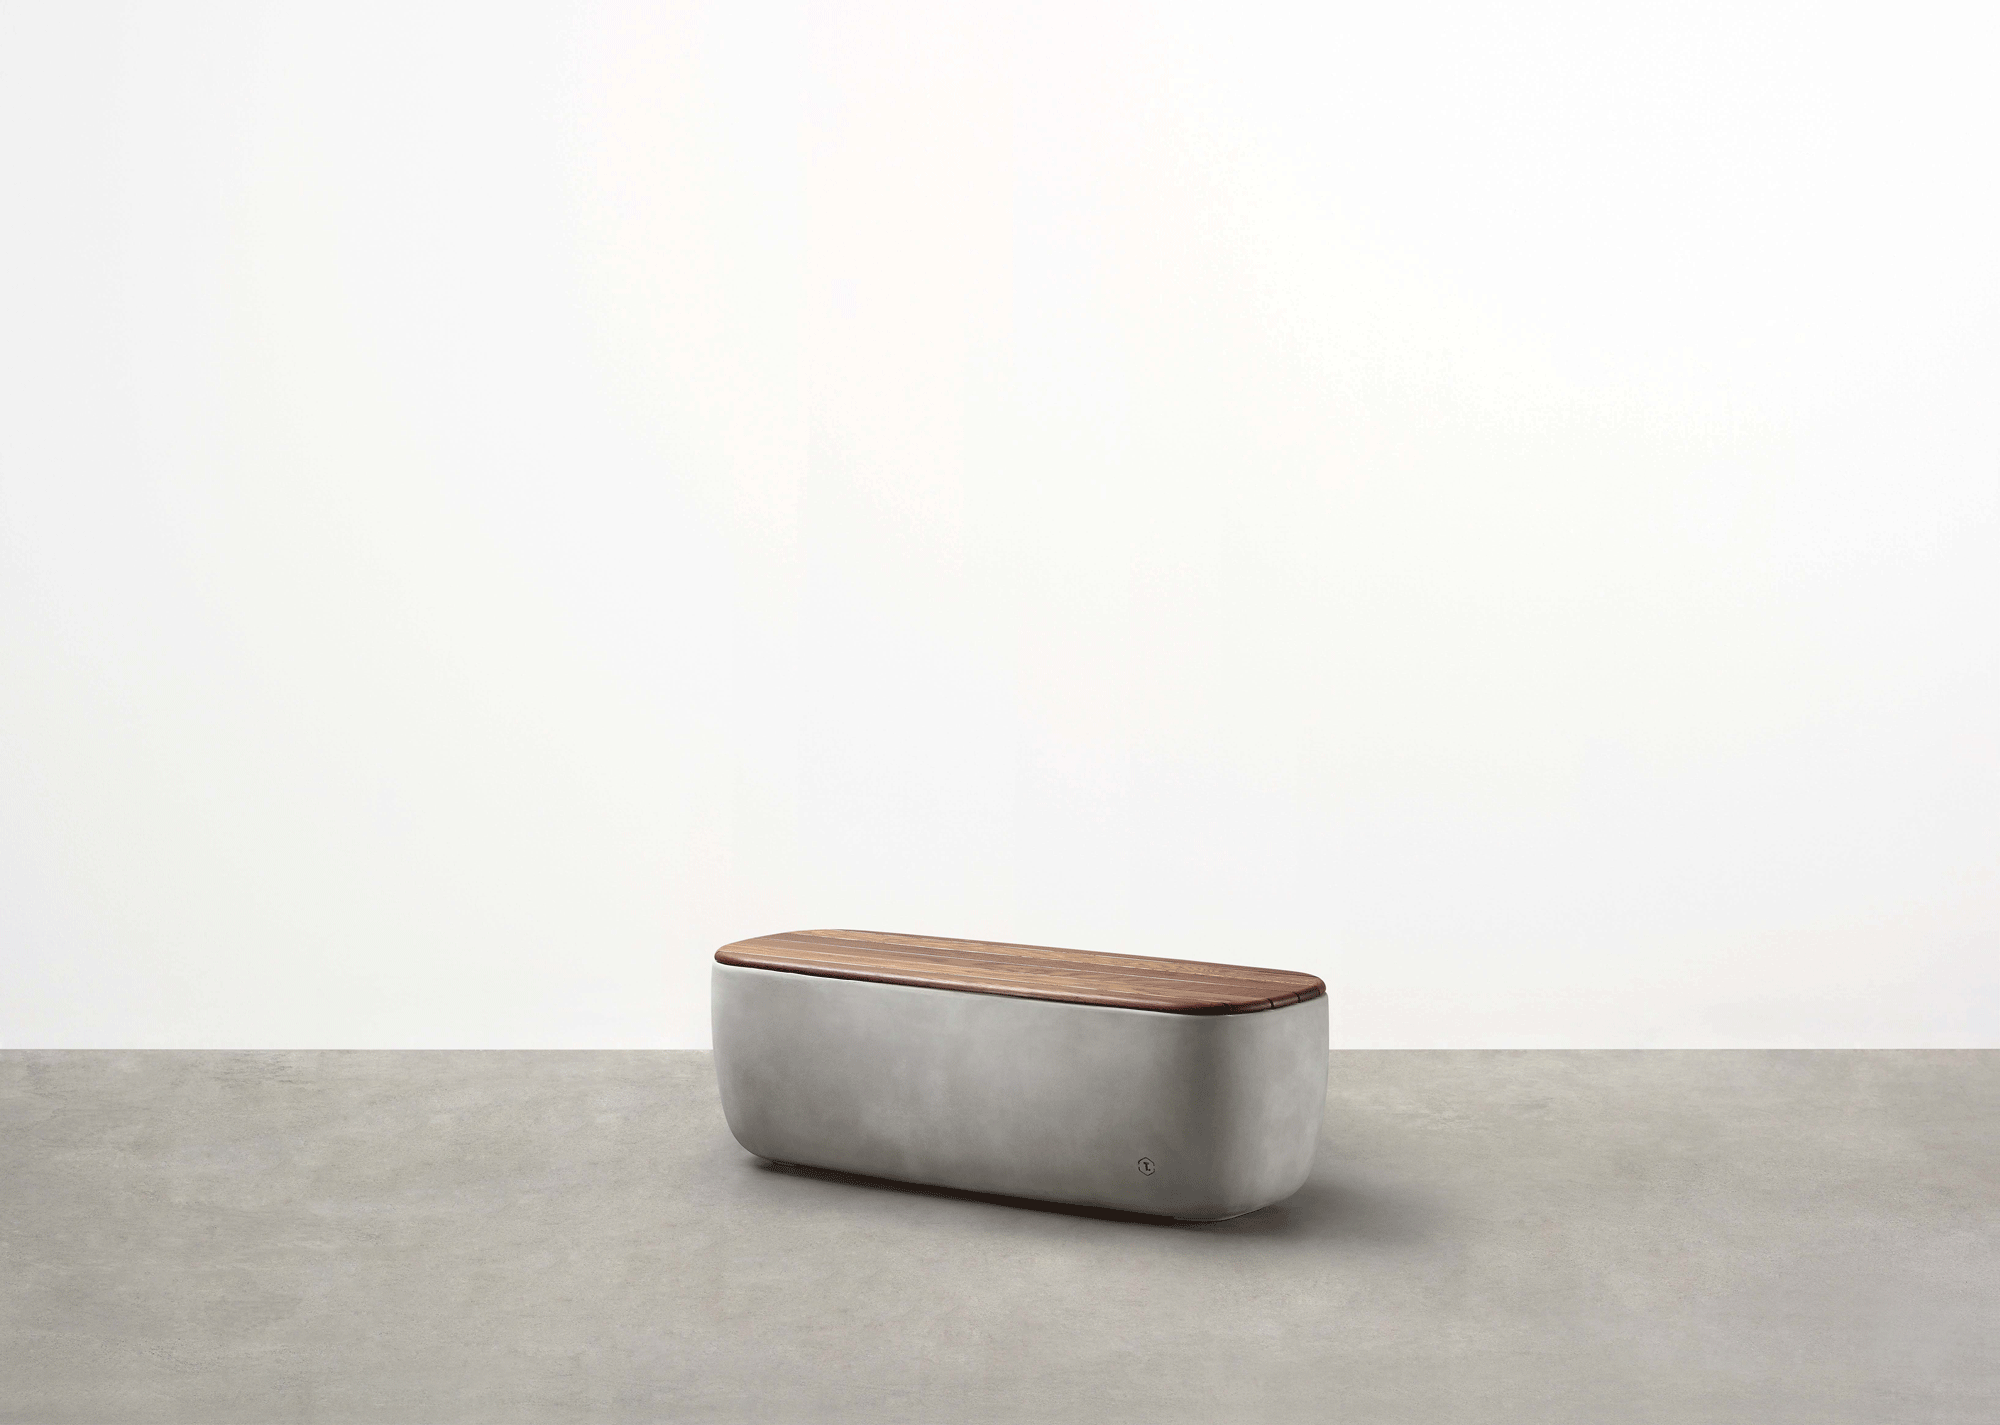 Designed by Adam Goodrum for Tait the Scape Module - a modular concrete bench seat - forms part of a fluid, triadic modular system.